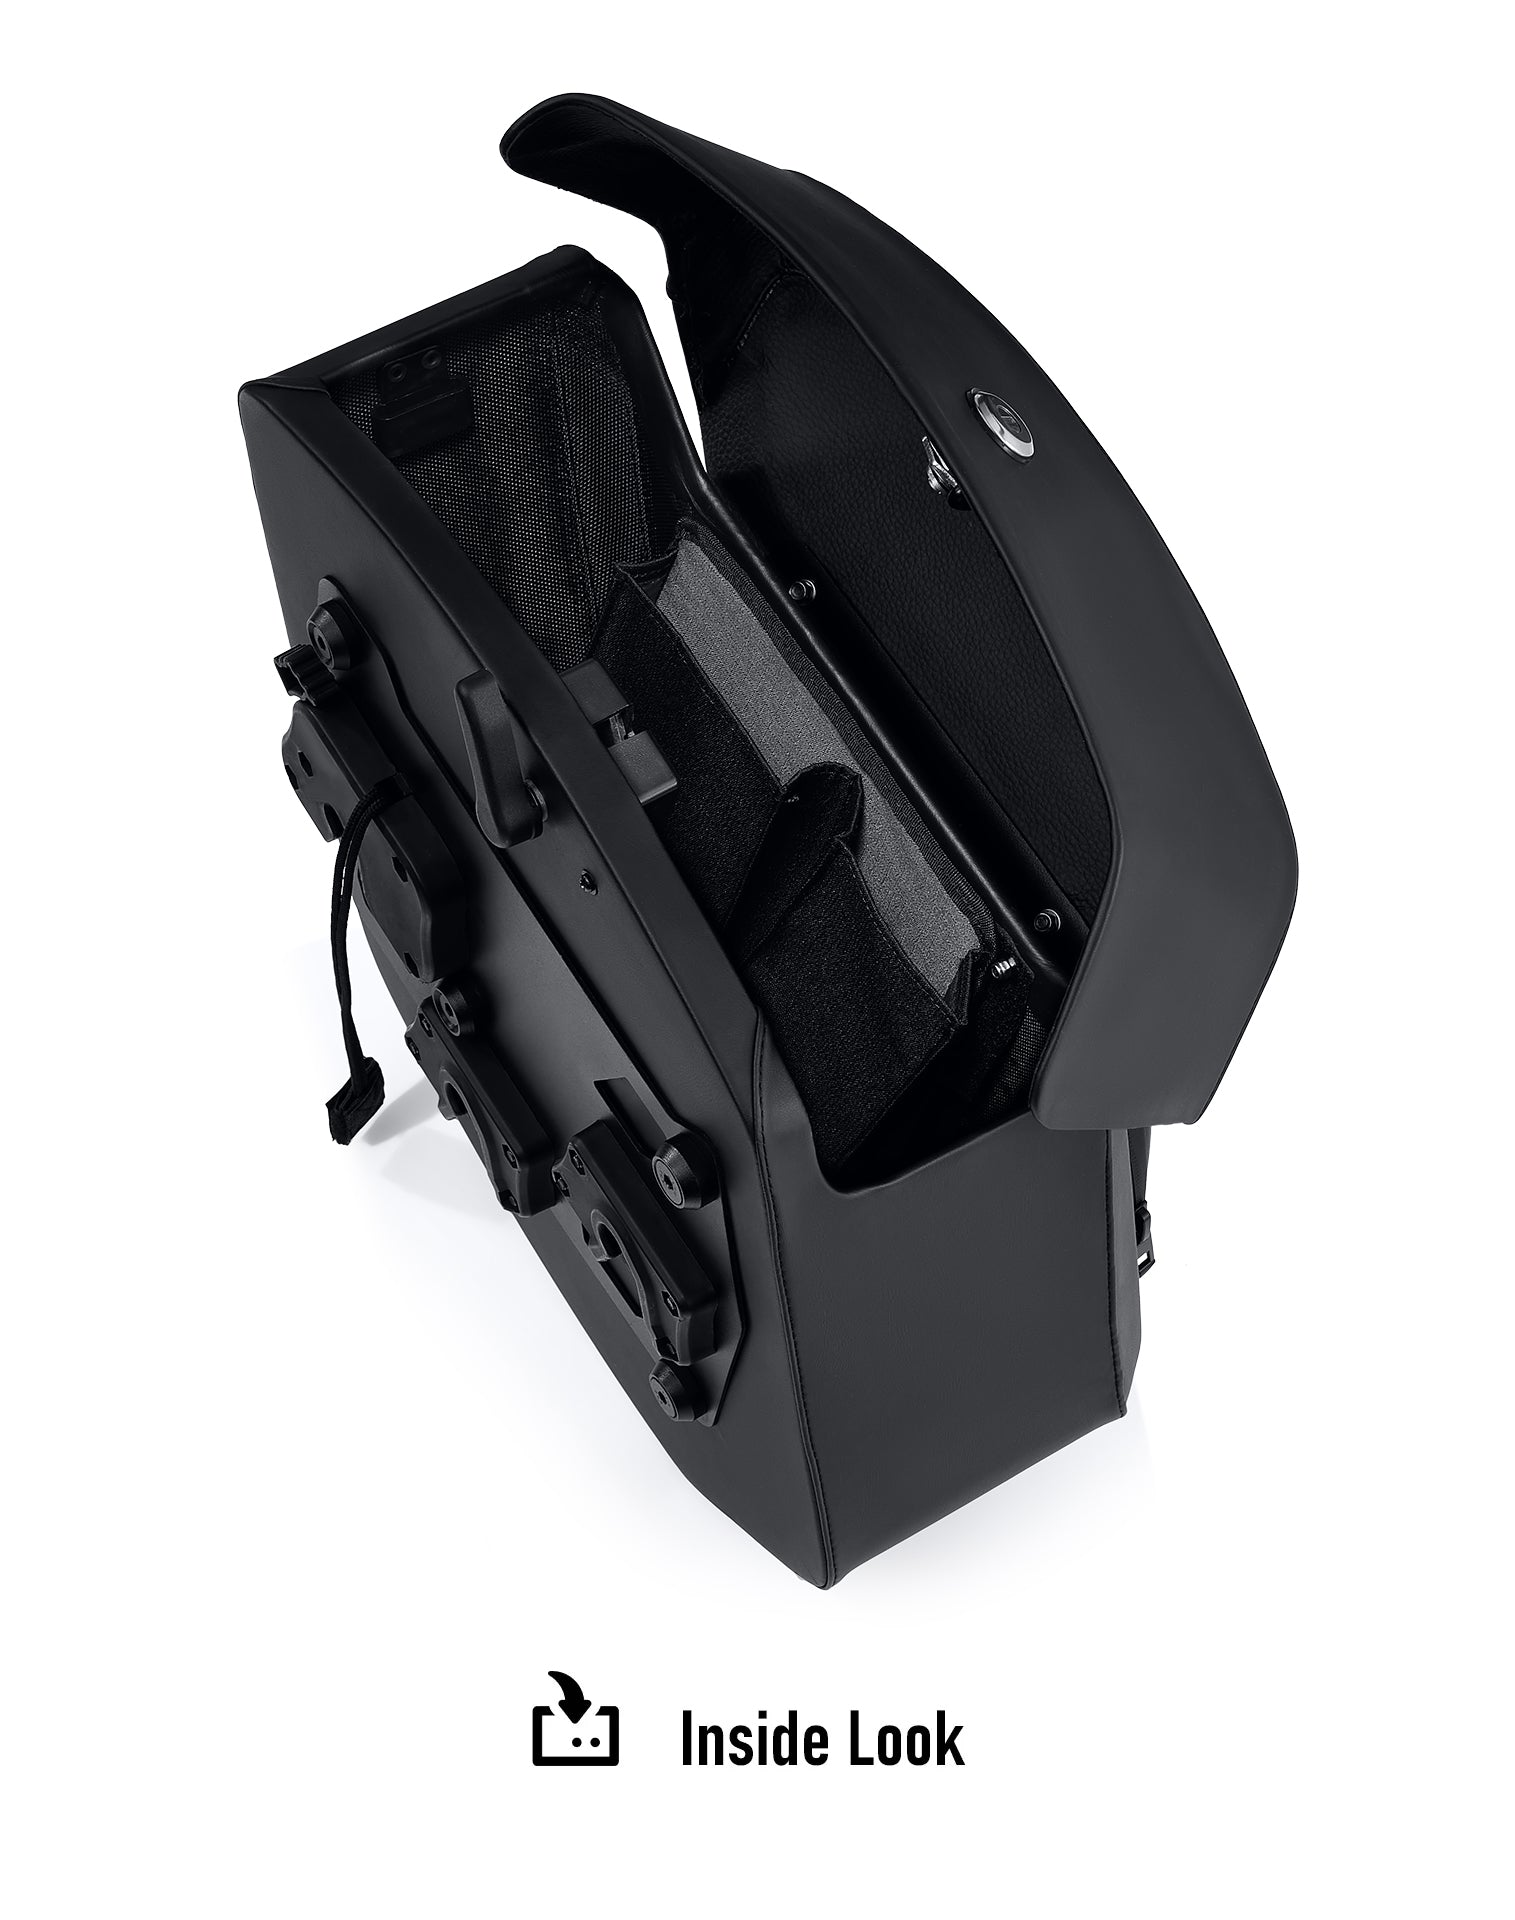 28L - Pantheon Medium Quick-Mount Motorcycle Saddlebags For Harley Sportster Forty Eight XL1200X/XL1200XS Inside Look